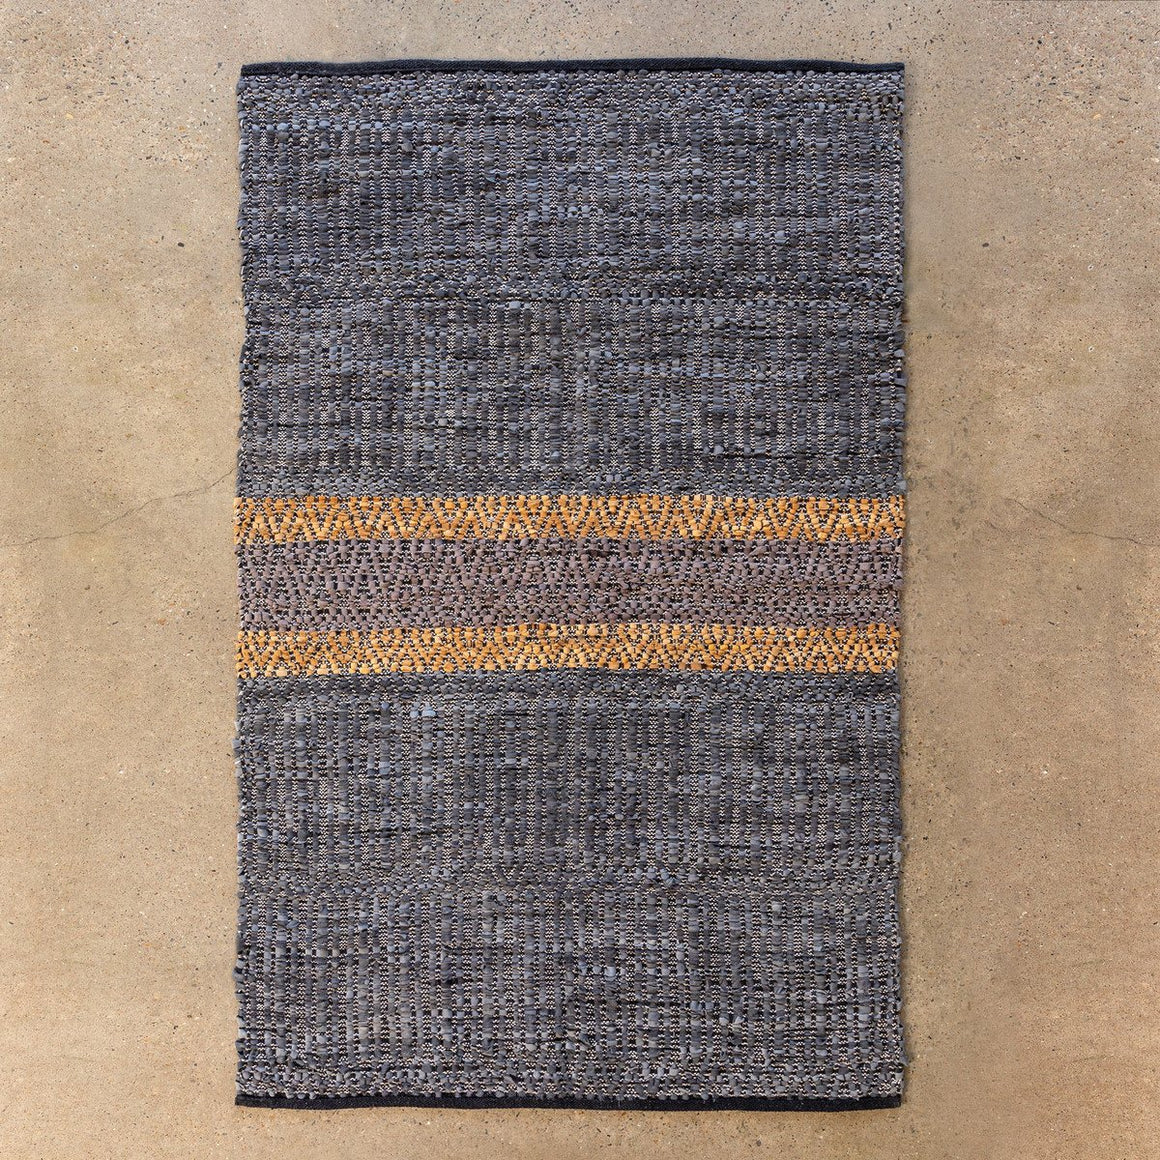 Woven Leather Rug - 4' x 6'